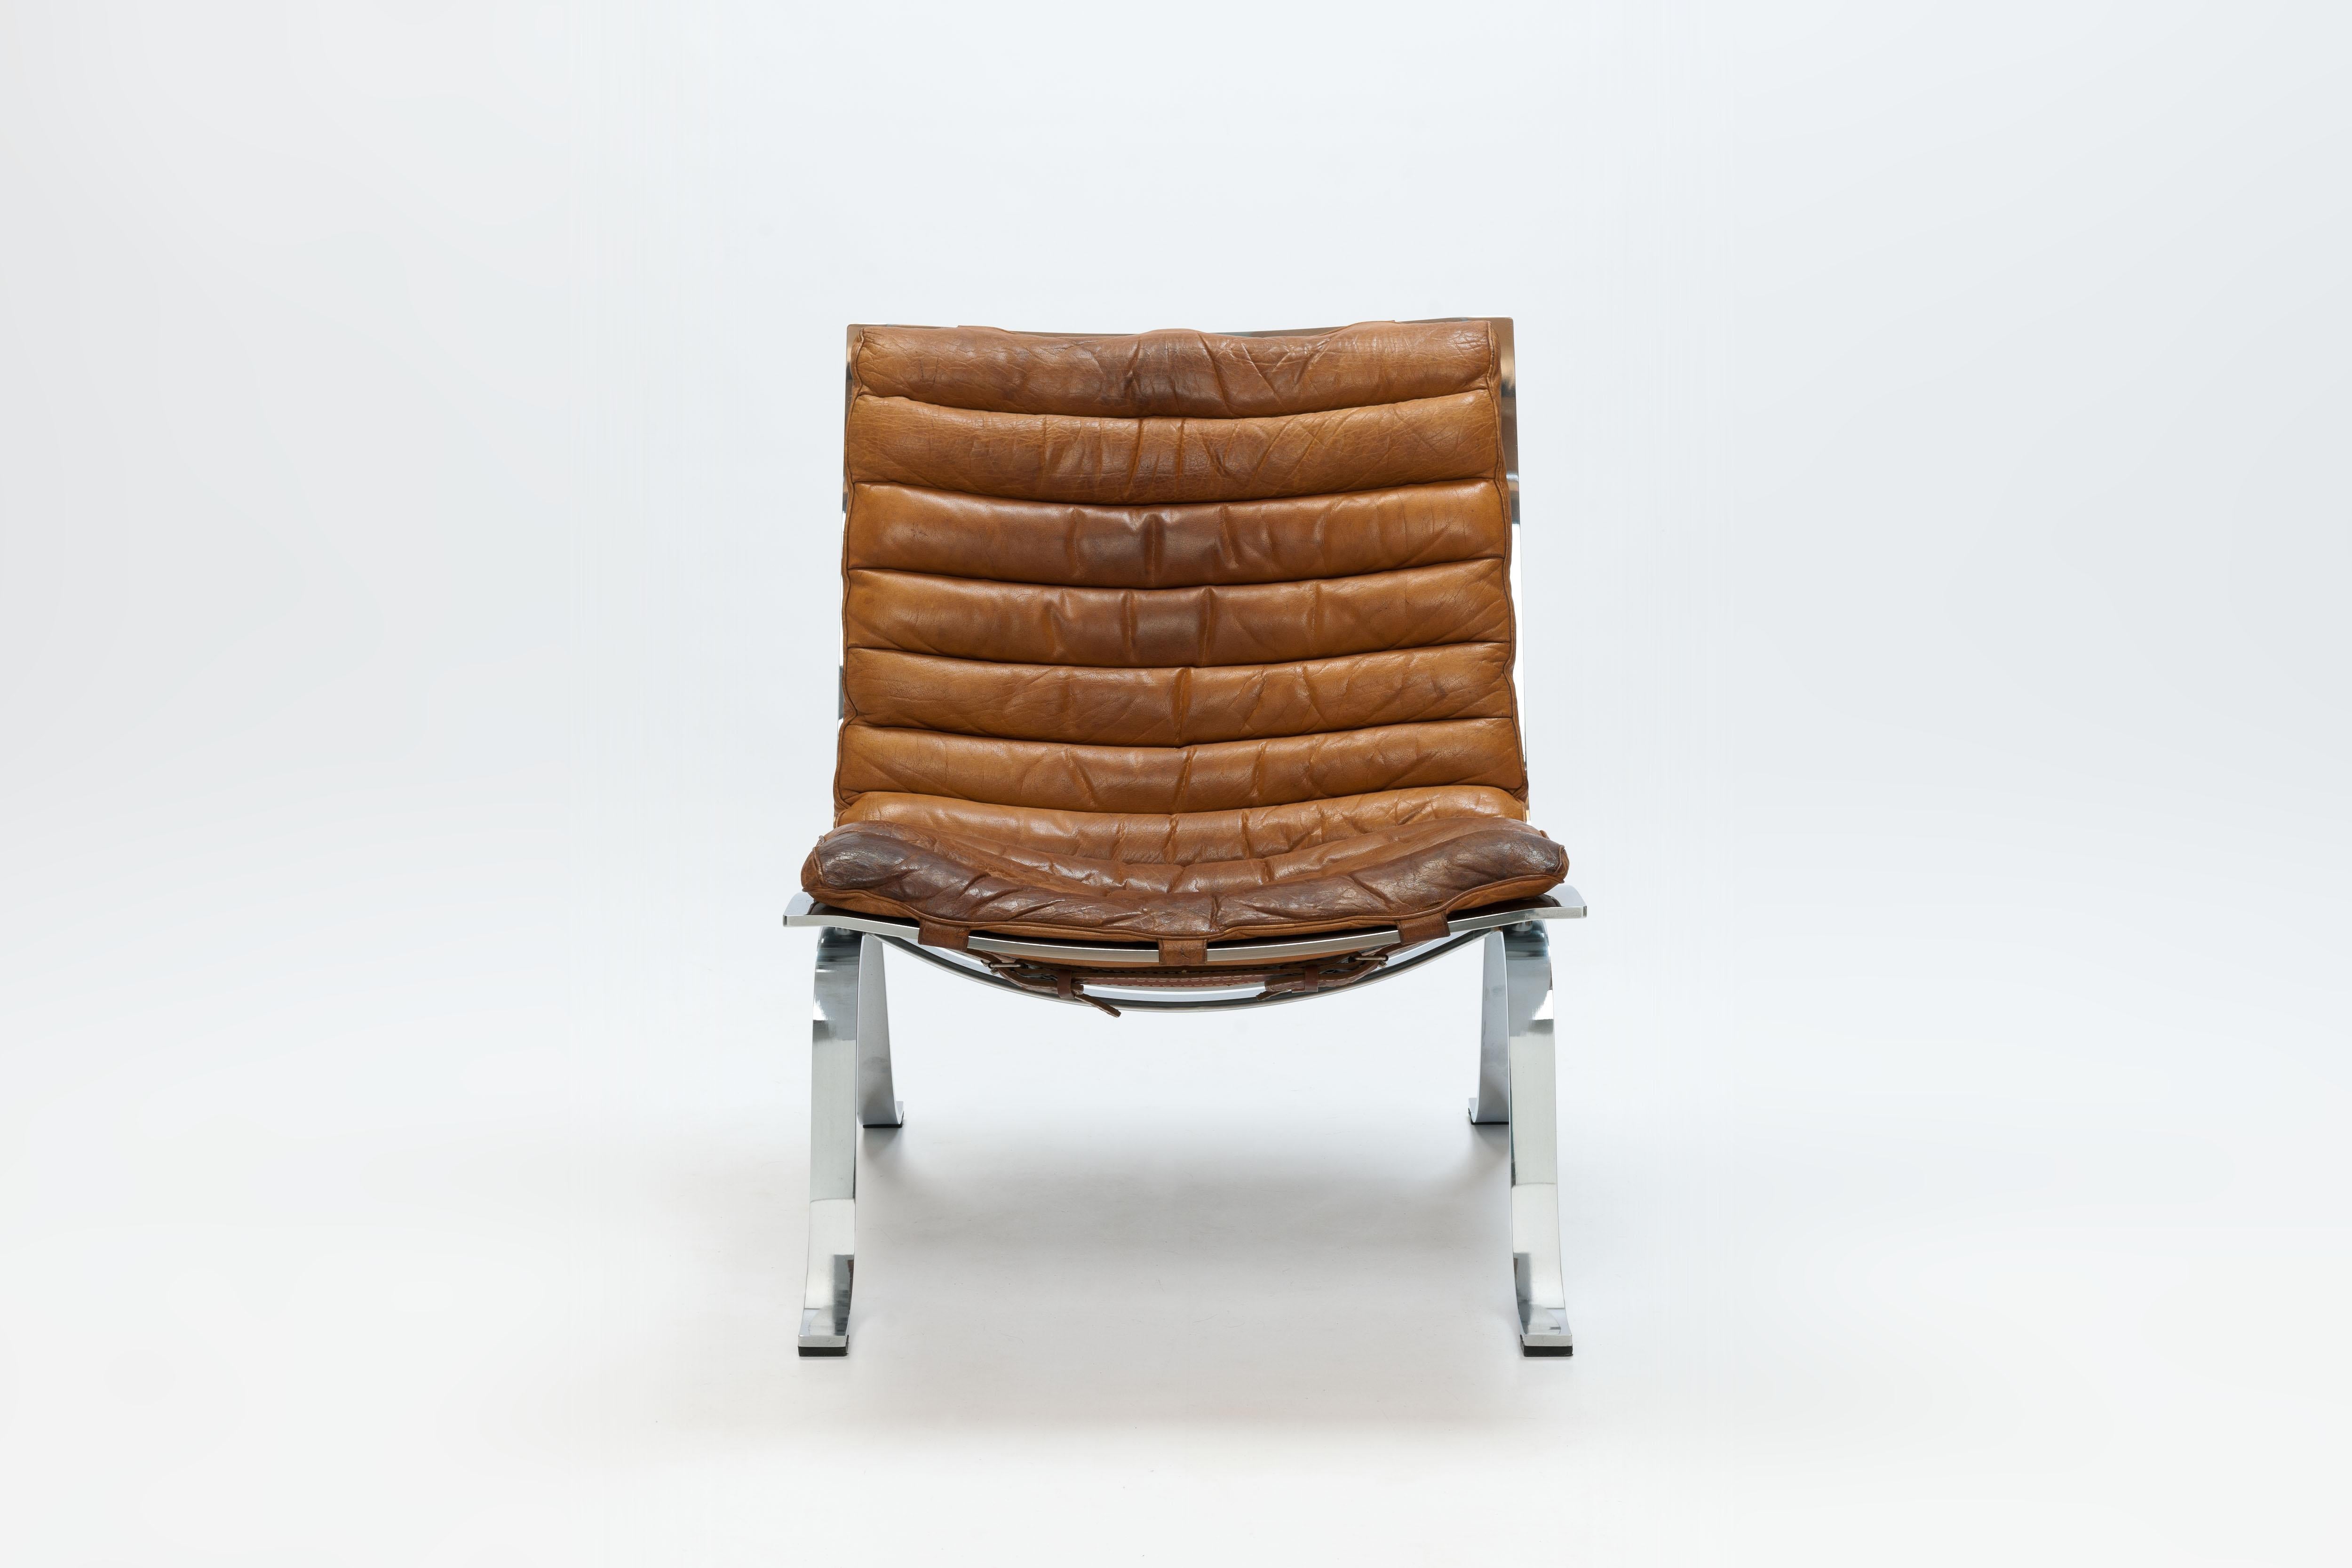 Rarely seen 'Ariet' lounge chair by Swedish Designer Arne Norell in a beautiful brown patinated buffalo leather and finest high gloss chromed frame. 
Please note the beautiful belts with buckles, this distinct detailing gives the chair a beautiful